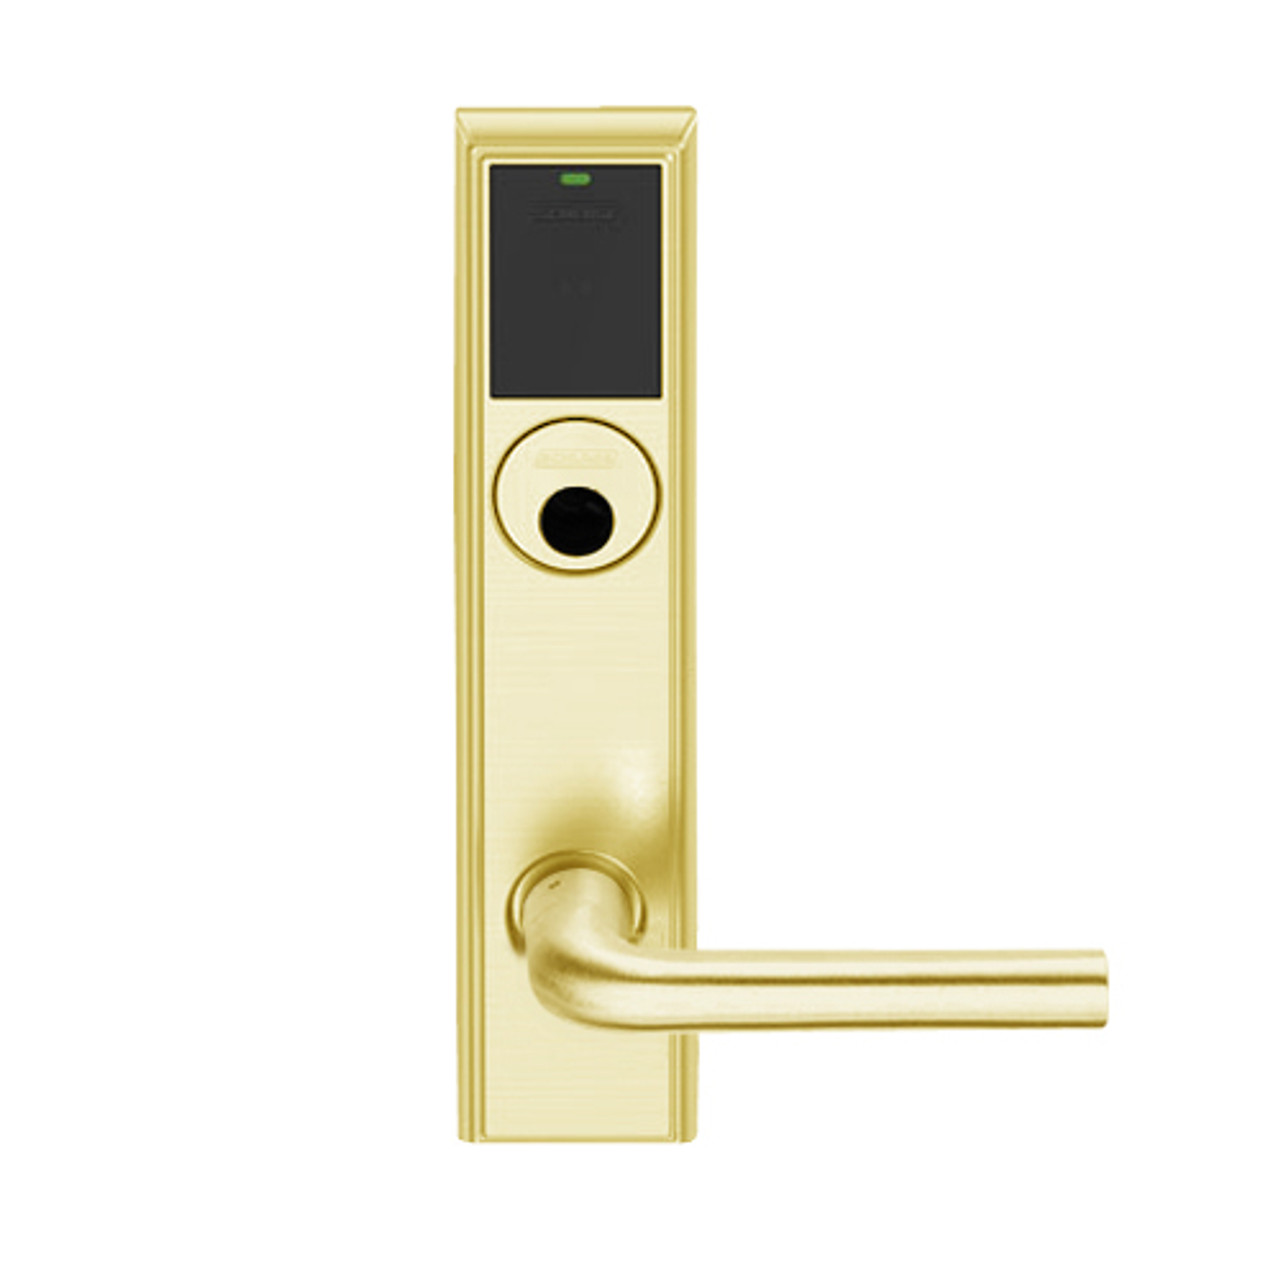 LEMD-ADD-L-02-605 Schlage Less Mortise Cylinder Privacy/Apartment Wireless Addison Mortise Deadbolt Lock with LED and 02 Lever in Bright Brass